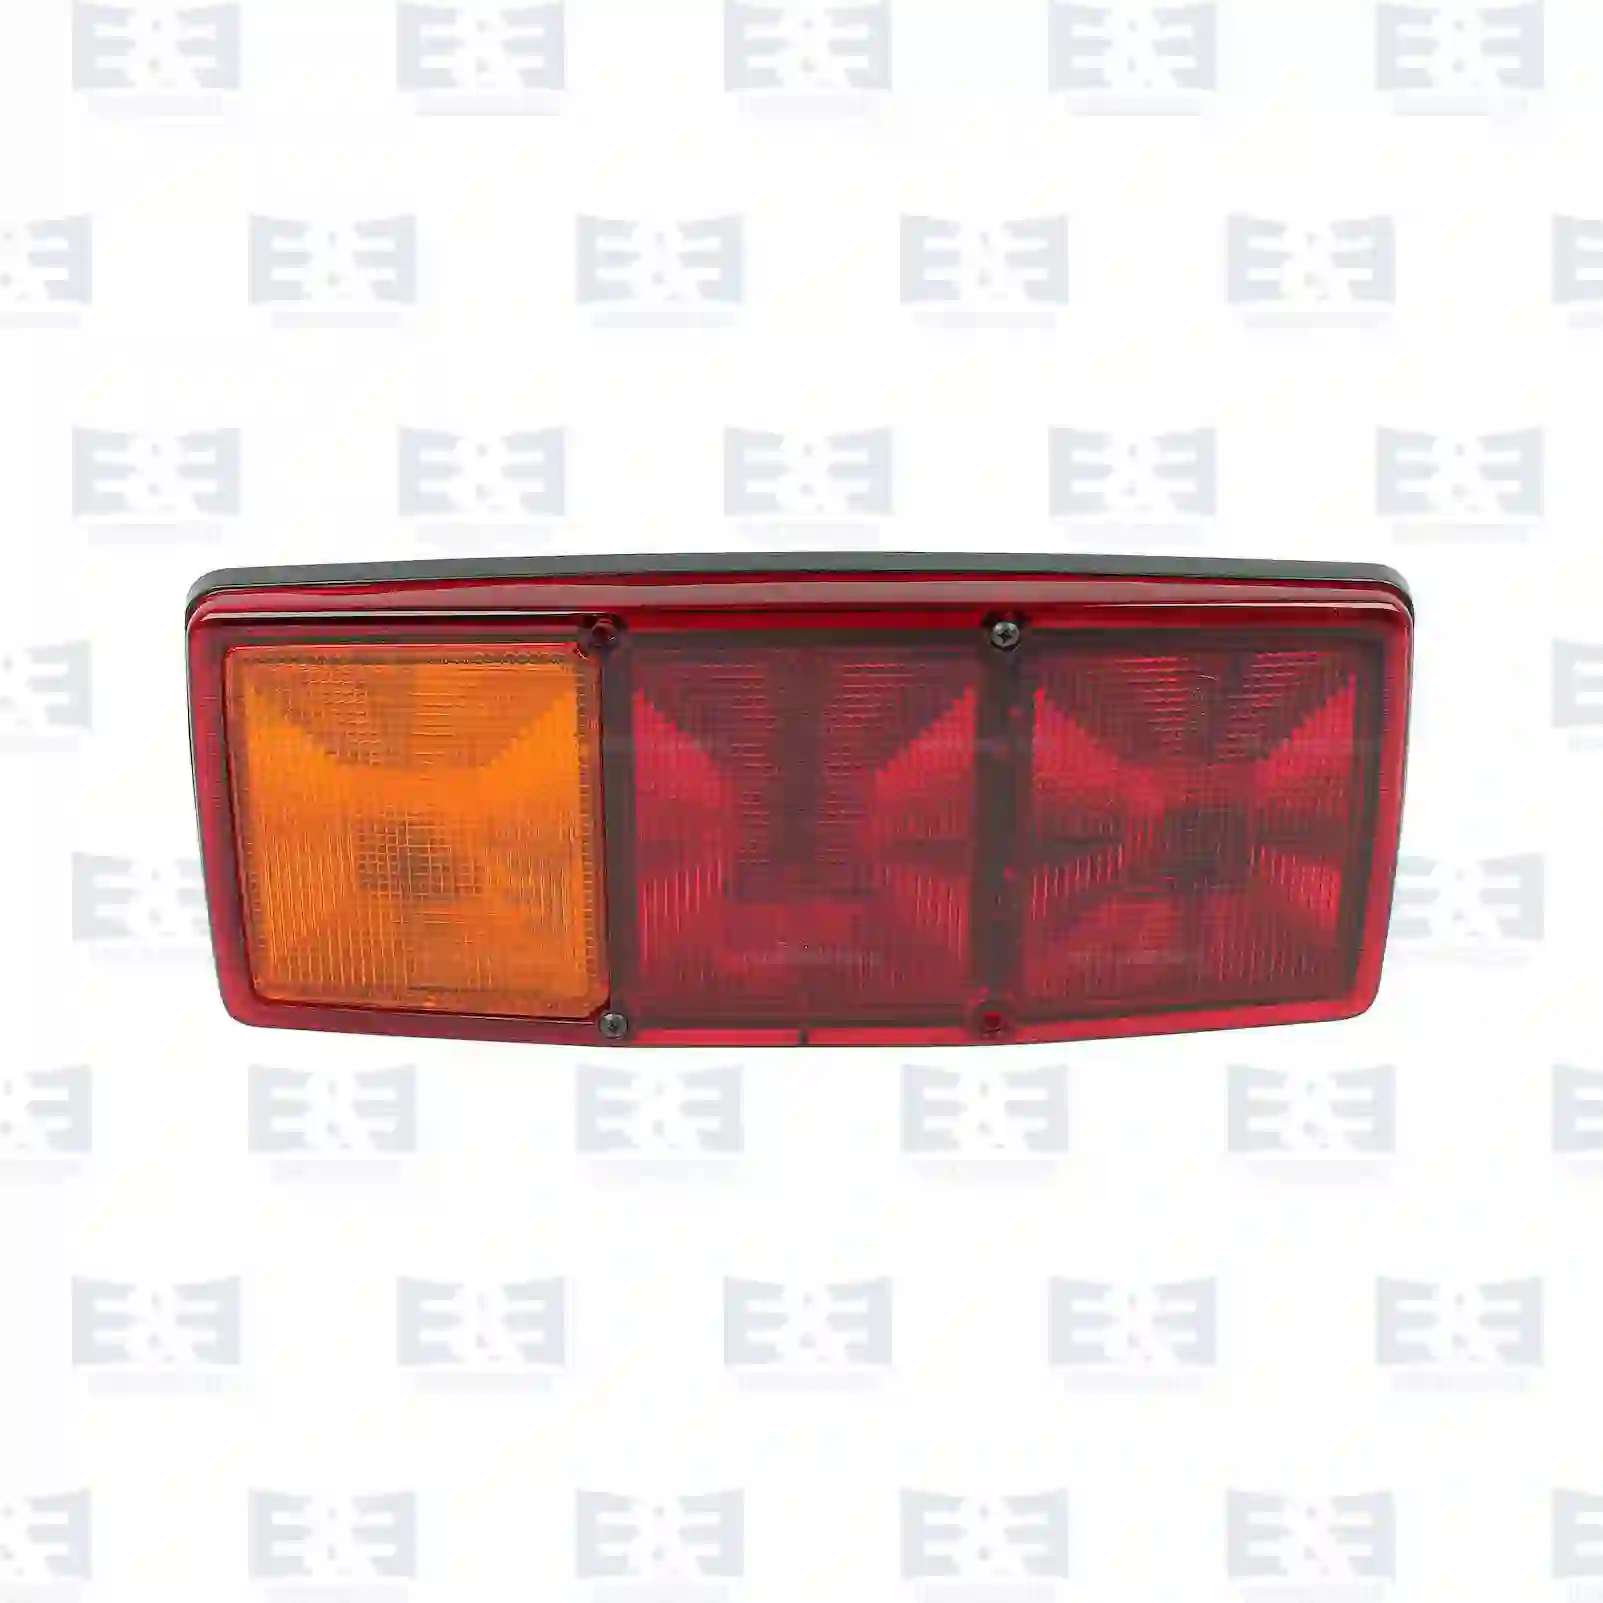 Tail lamp, left, without bulbs, 2E2290724, 19649040, 8176154, 4001011, 09246030, 81252256259, 0015449403, 0025445703 ||  2E2290724 E&E Truck Spare Parts | Truck Spare Parts, Auotomotive Spare Parts Tail lamp, left, without bulbs, 2E2290724, 19649040, 8176154, 4001011, 09246030, 81252256259, 0015449403, 0025445703 ||  2E2290724 E&E Truck Spare Parts | Truck Spare Parts, Auotomotive Spare Parts